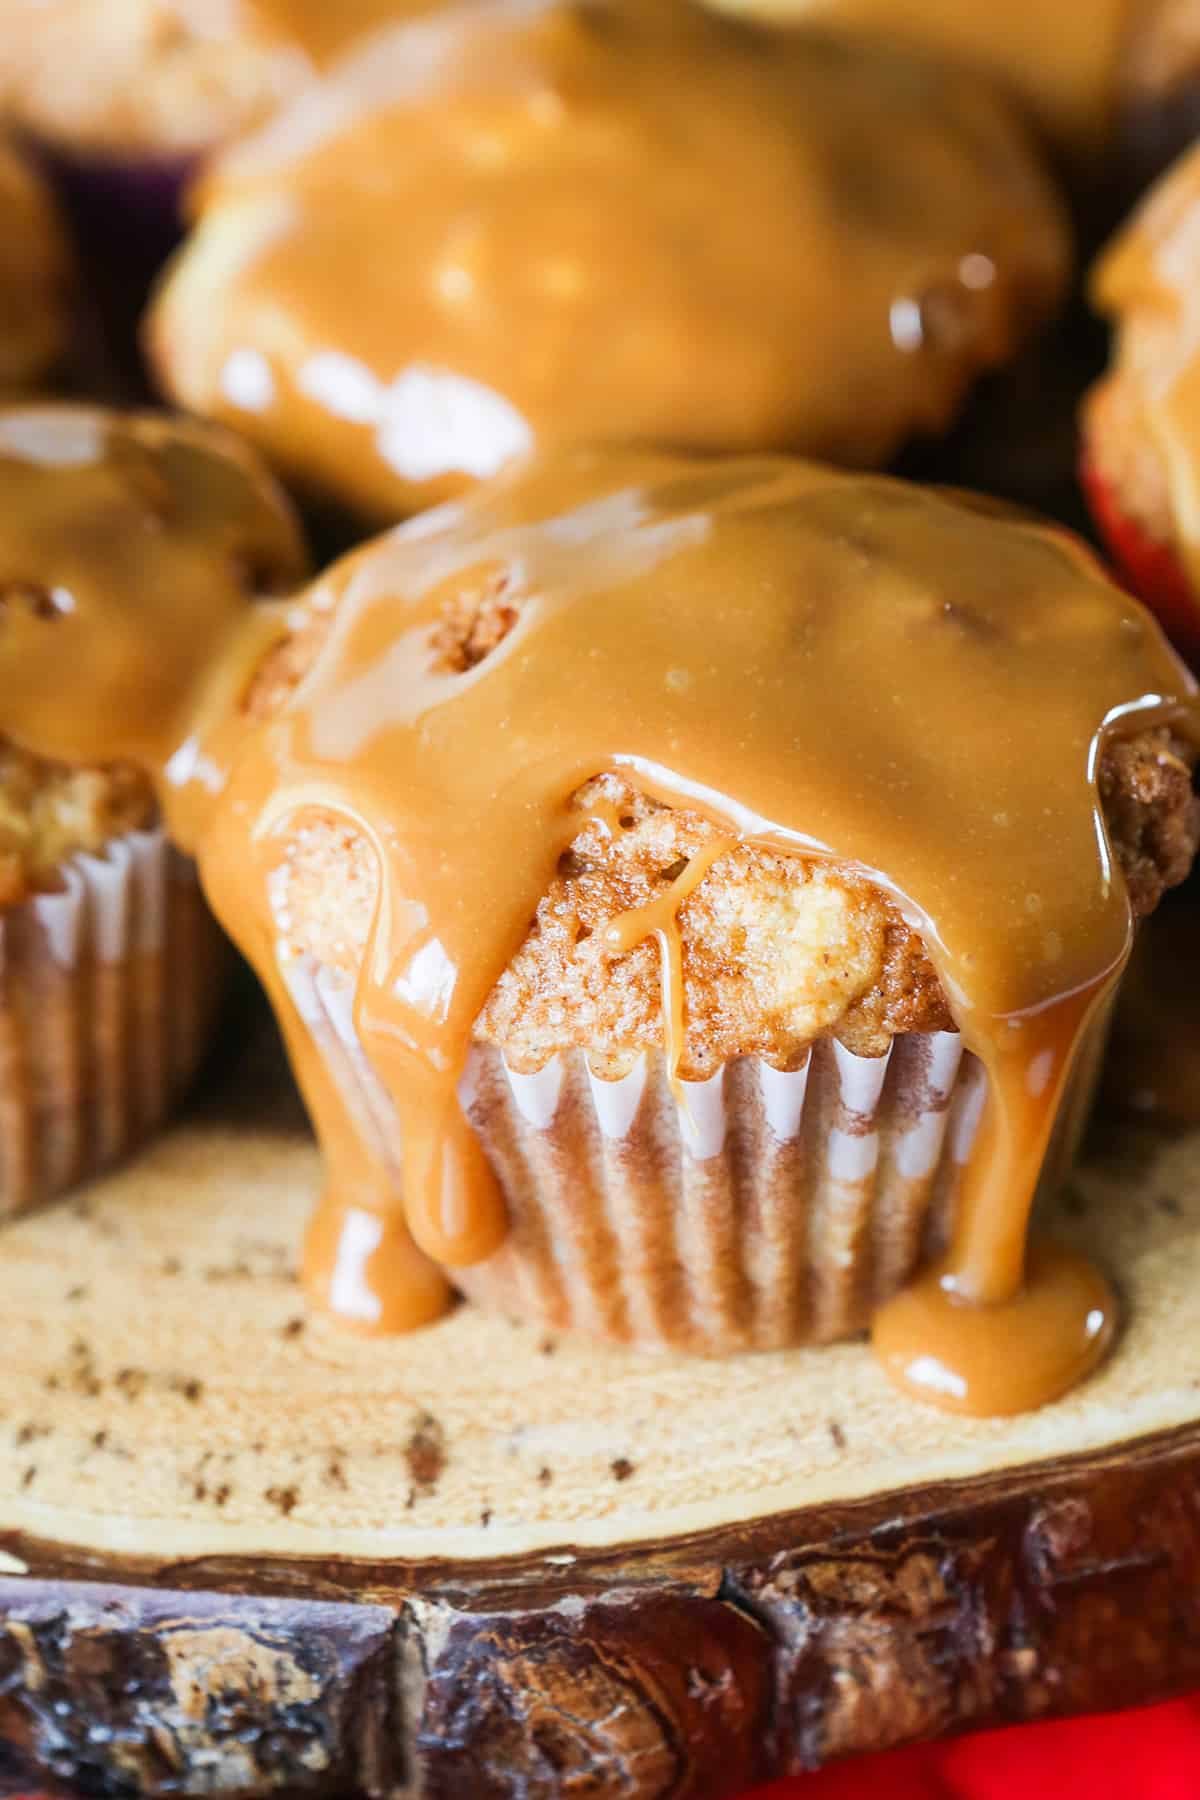 caramel dripping down sides of a cupcake.